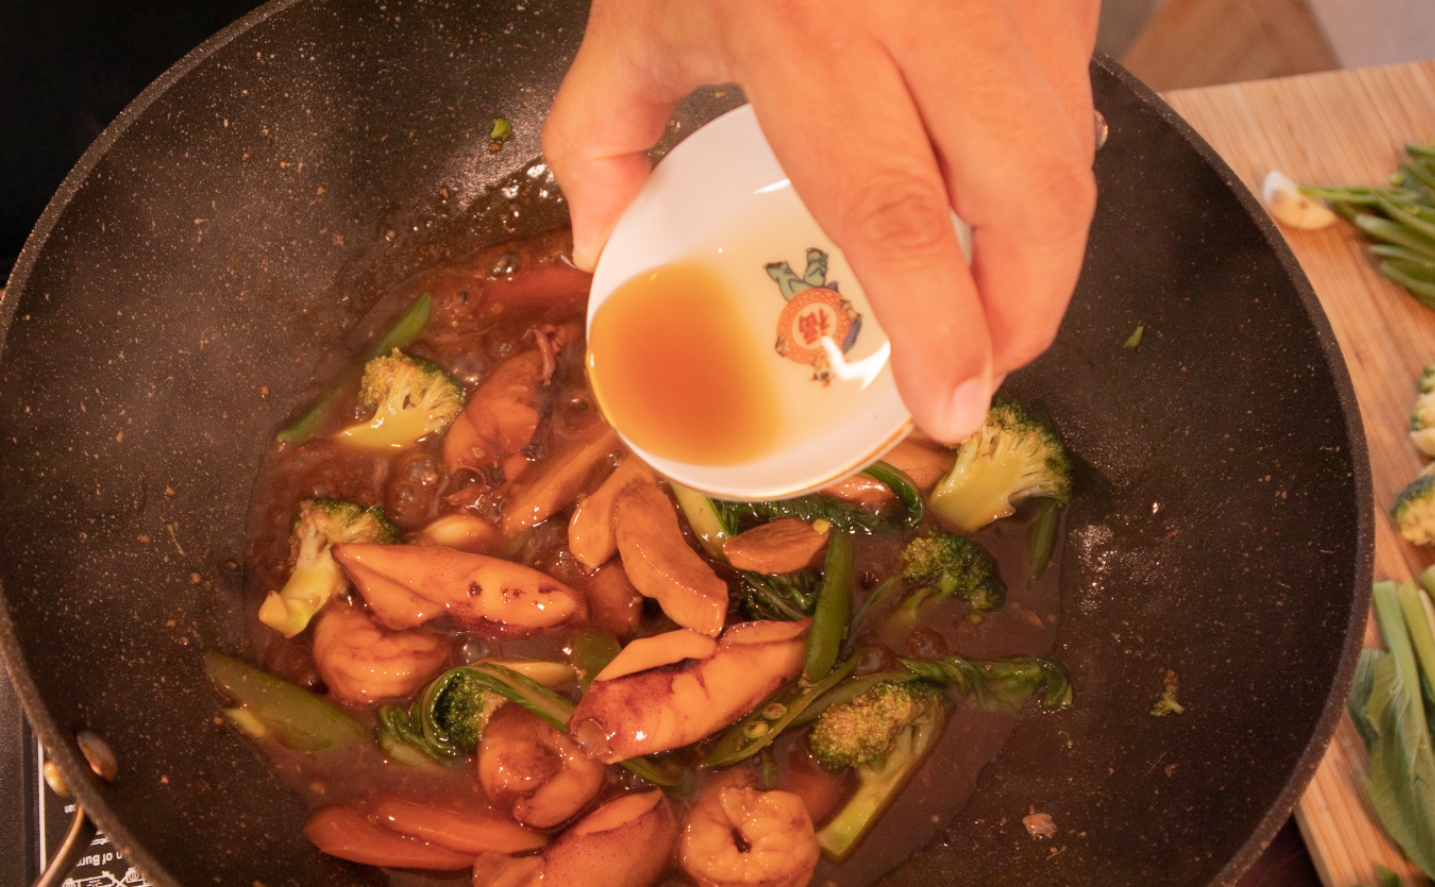 Adding sesame oil to the finished dish